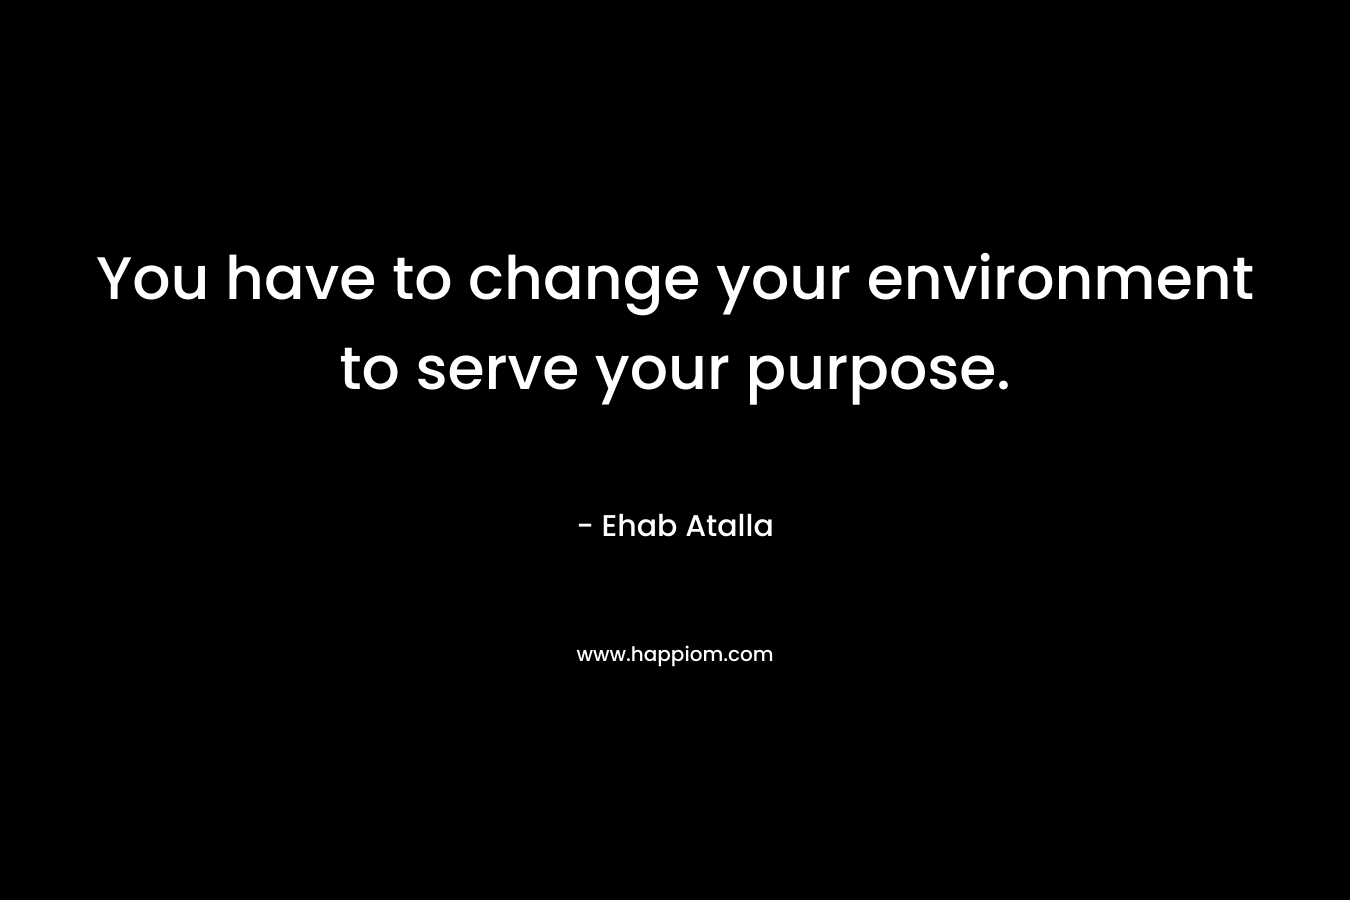 You have to change your environment to serve your purpose. – Ehab Atalla